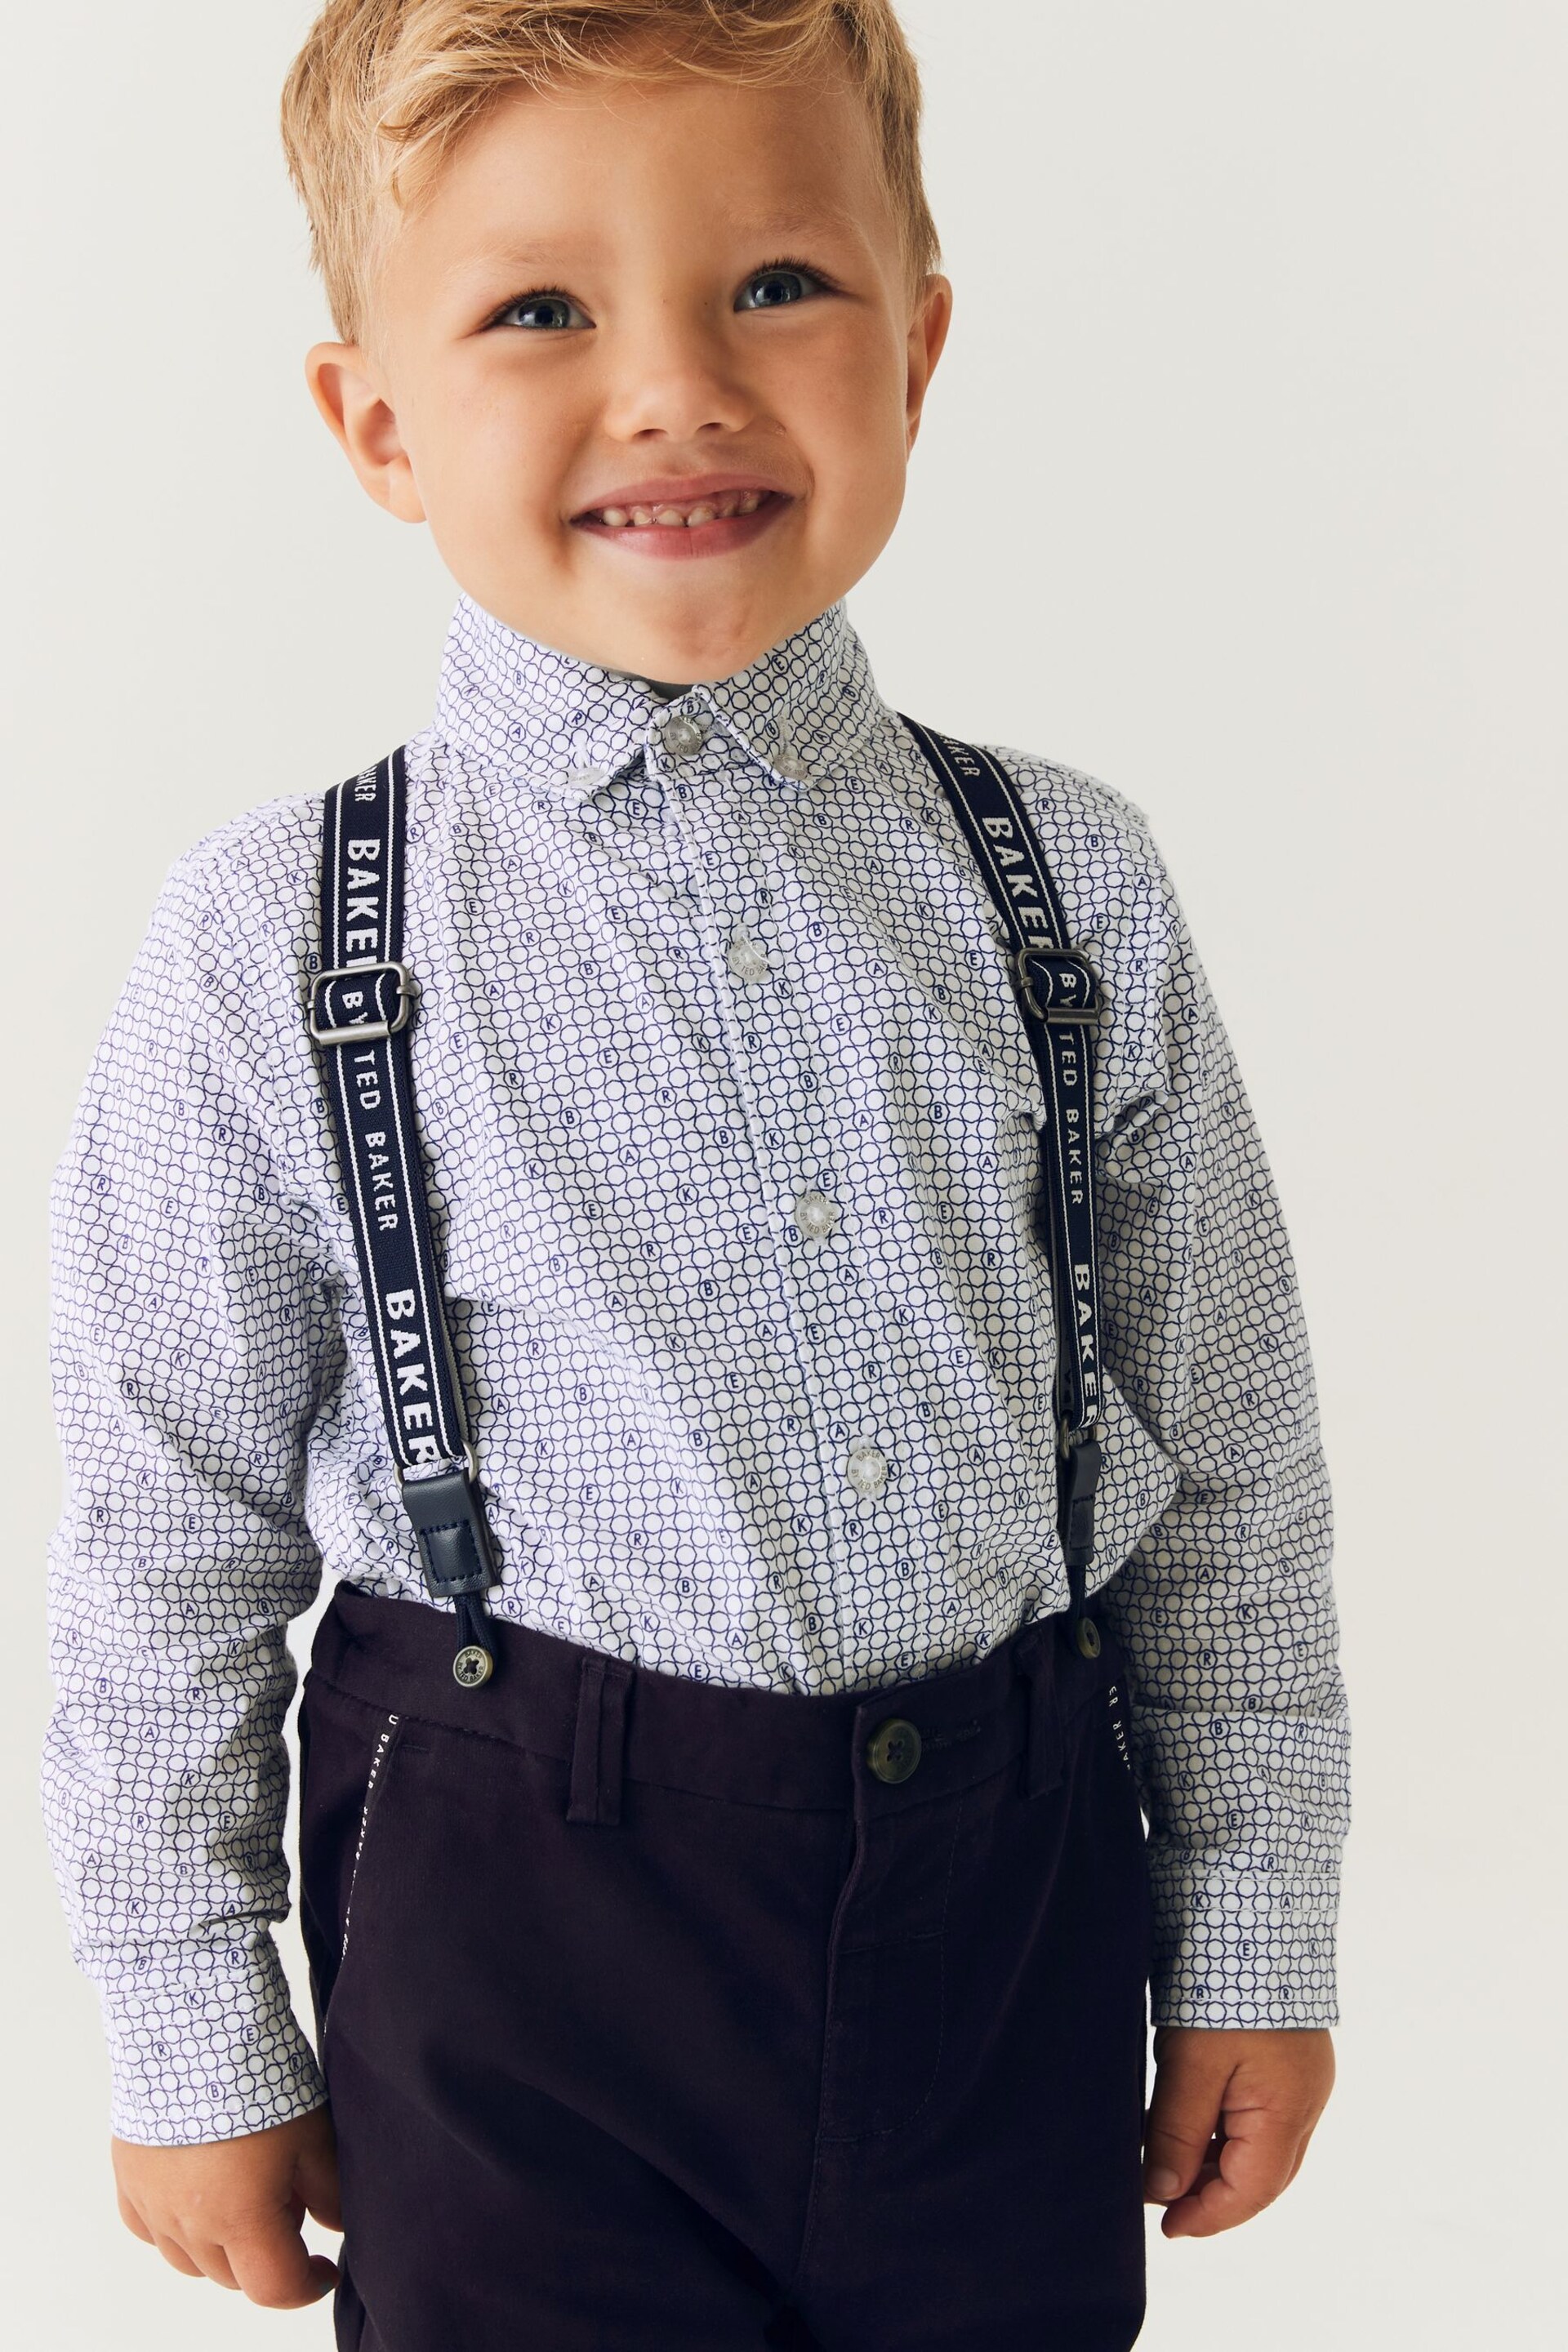 Baker by Ted Baker (3mths-6yrs) Shirt, Braces and Chino Set - Image 4 of 14